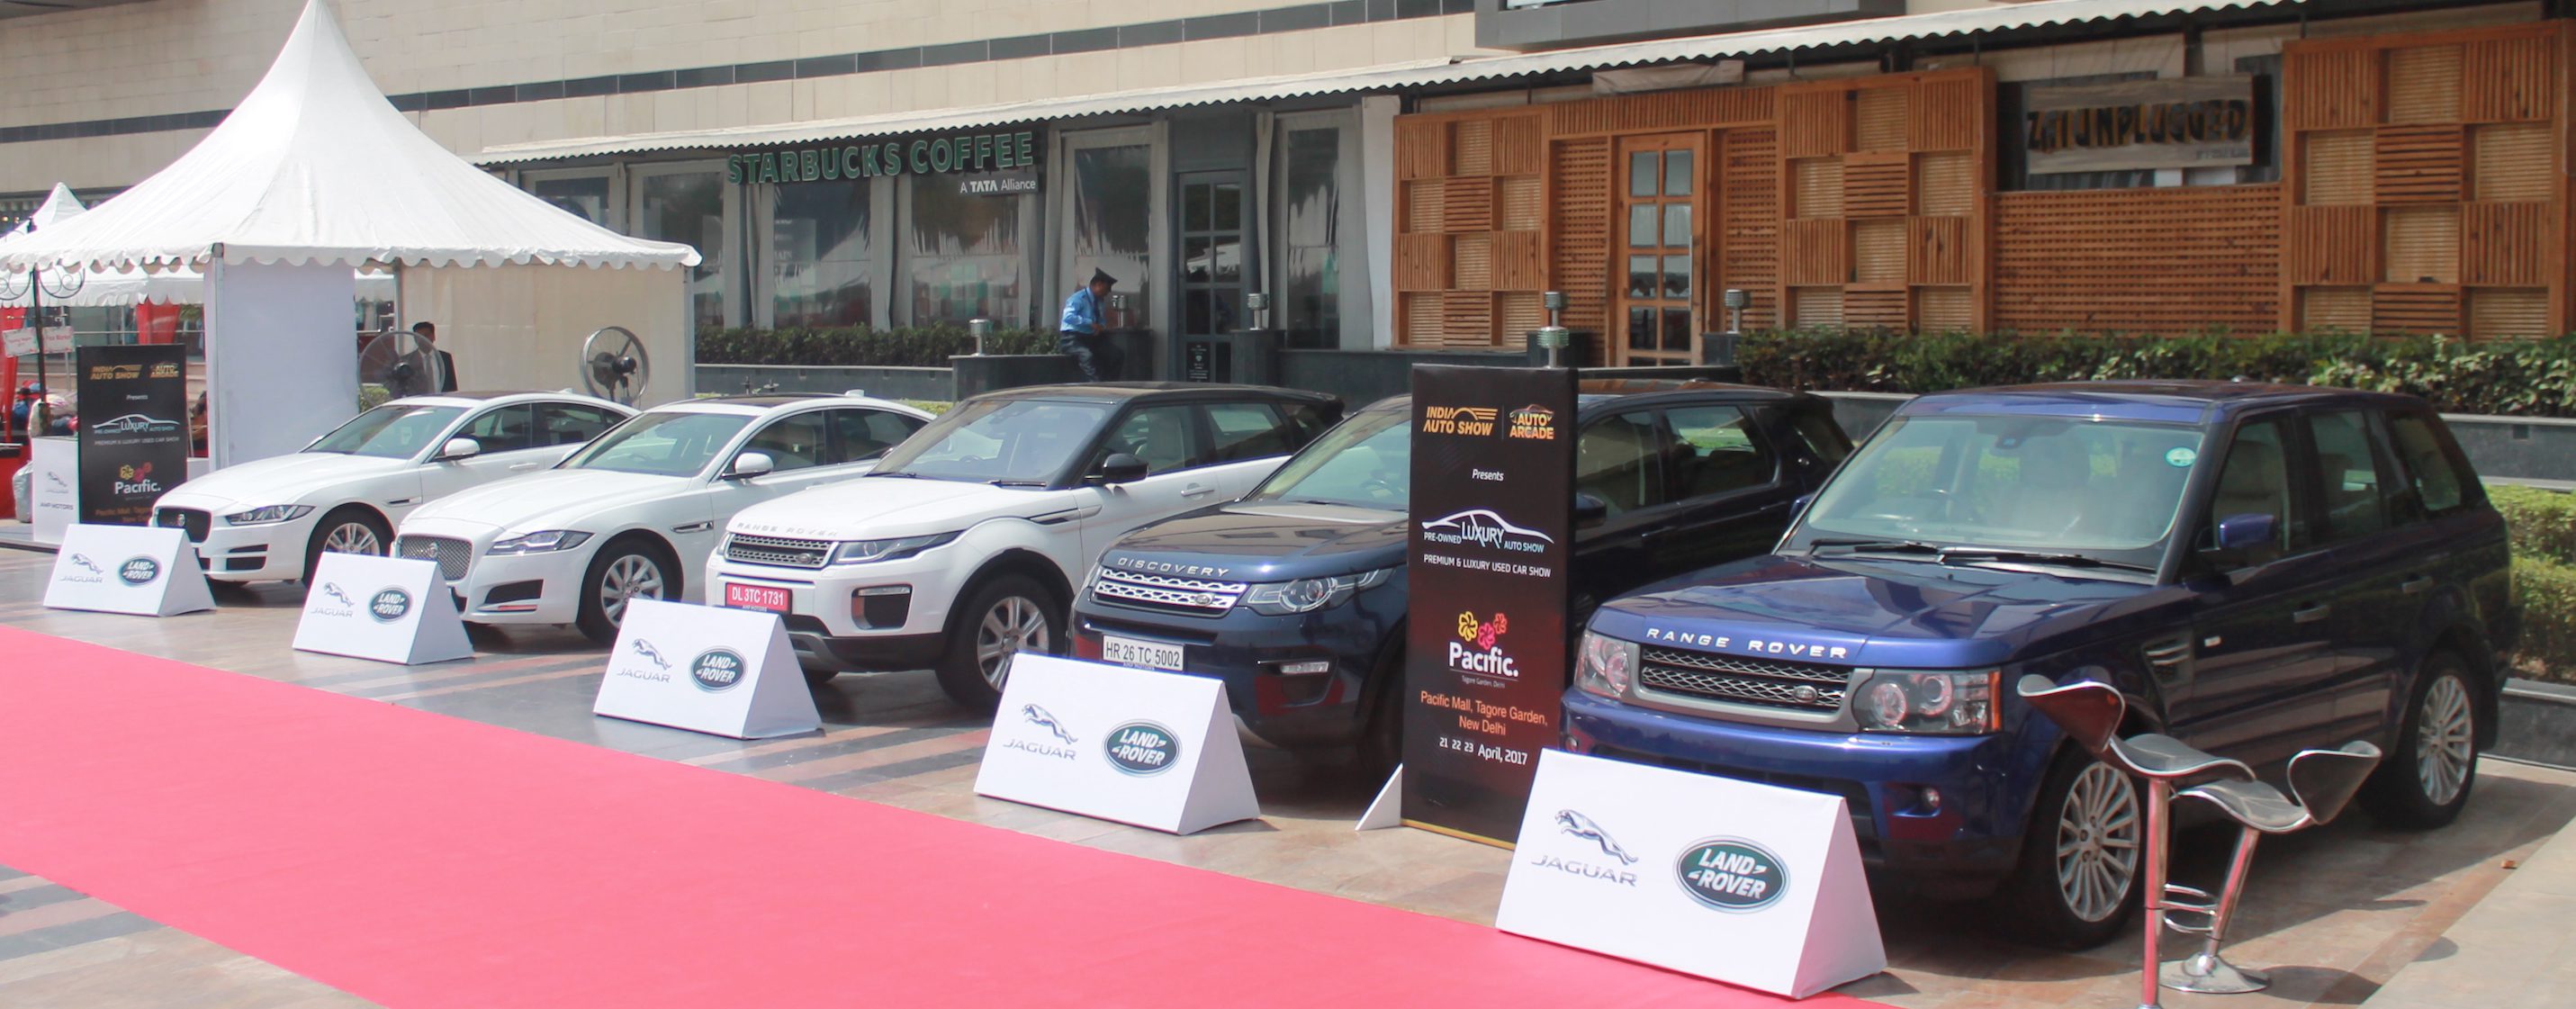 Pacific Mall organises Season III ‘AUTO ARCADE’ - The Fast, The Furious, The Hottest Auto Exhibition in town